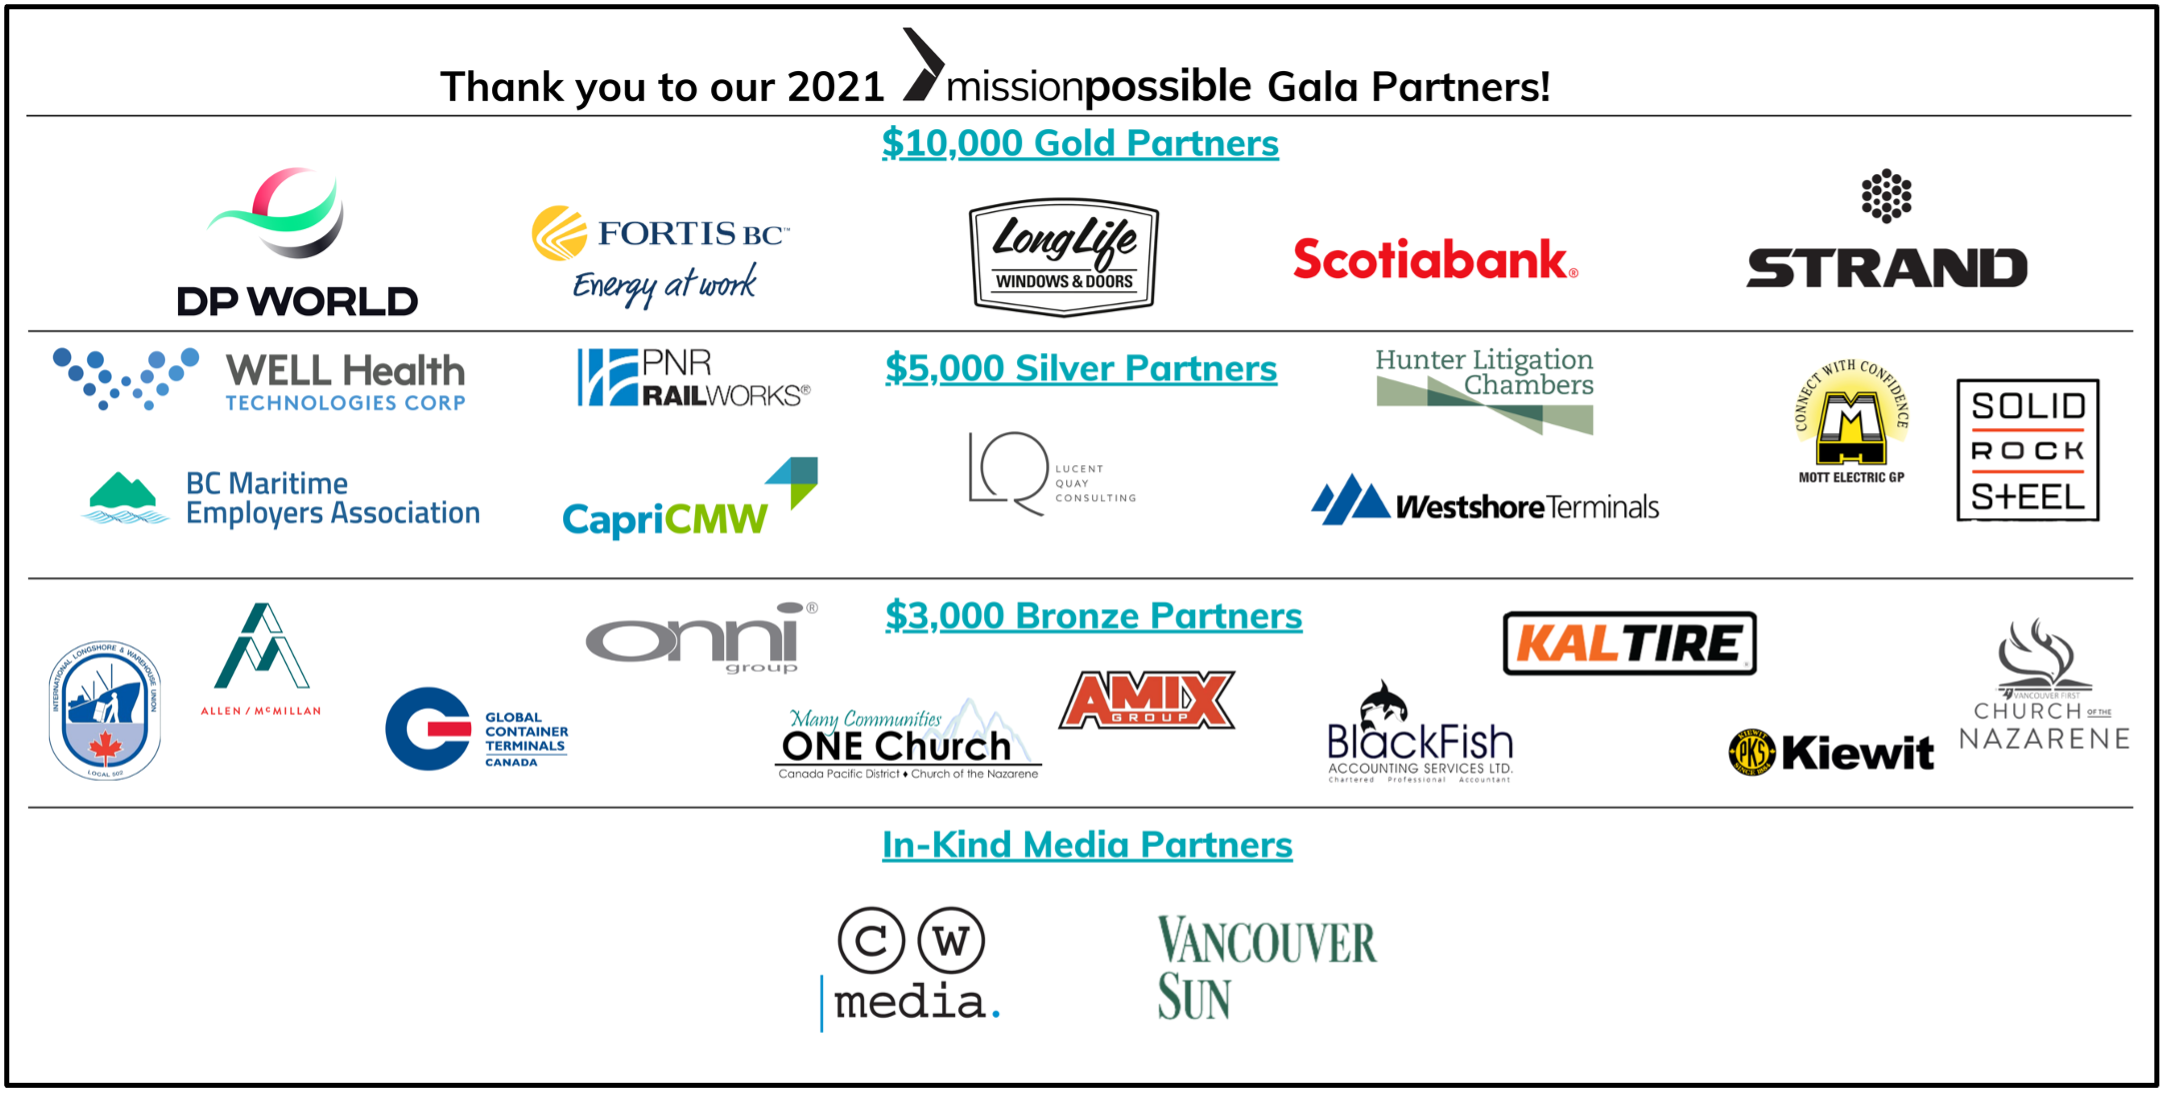 2021 Gala Partners Thank You Graphic